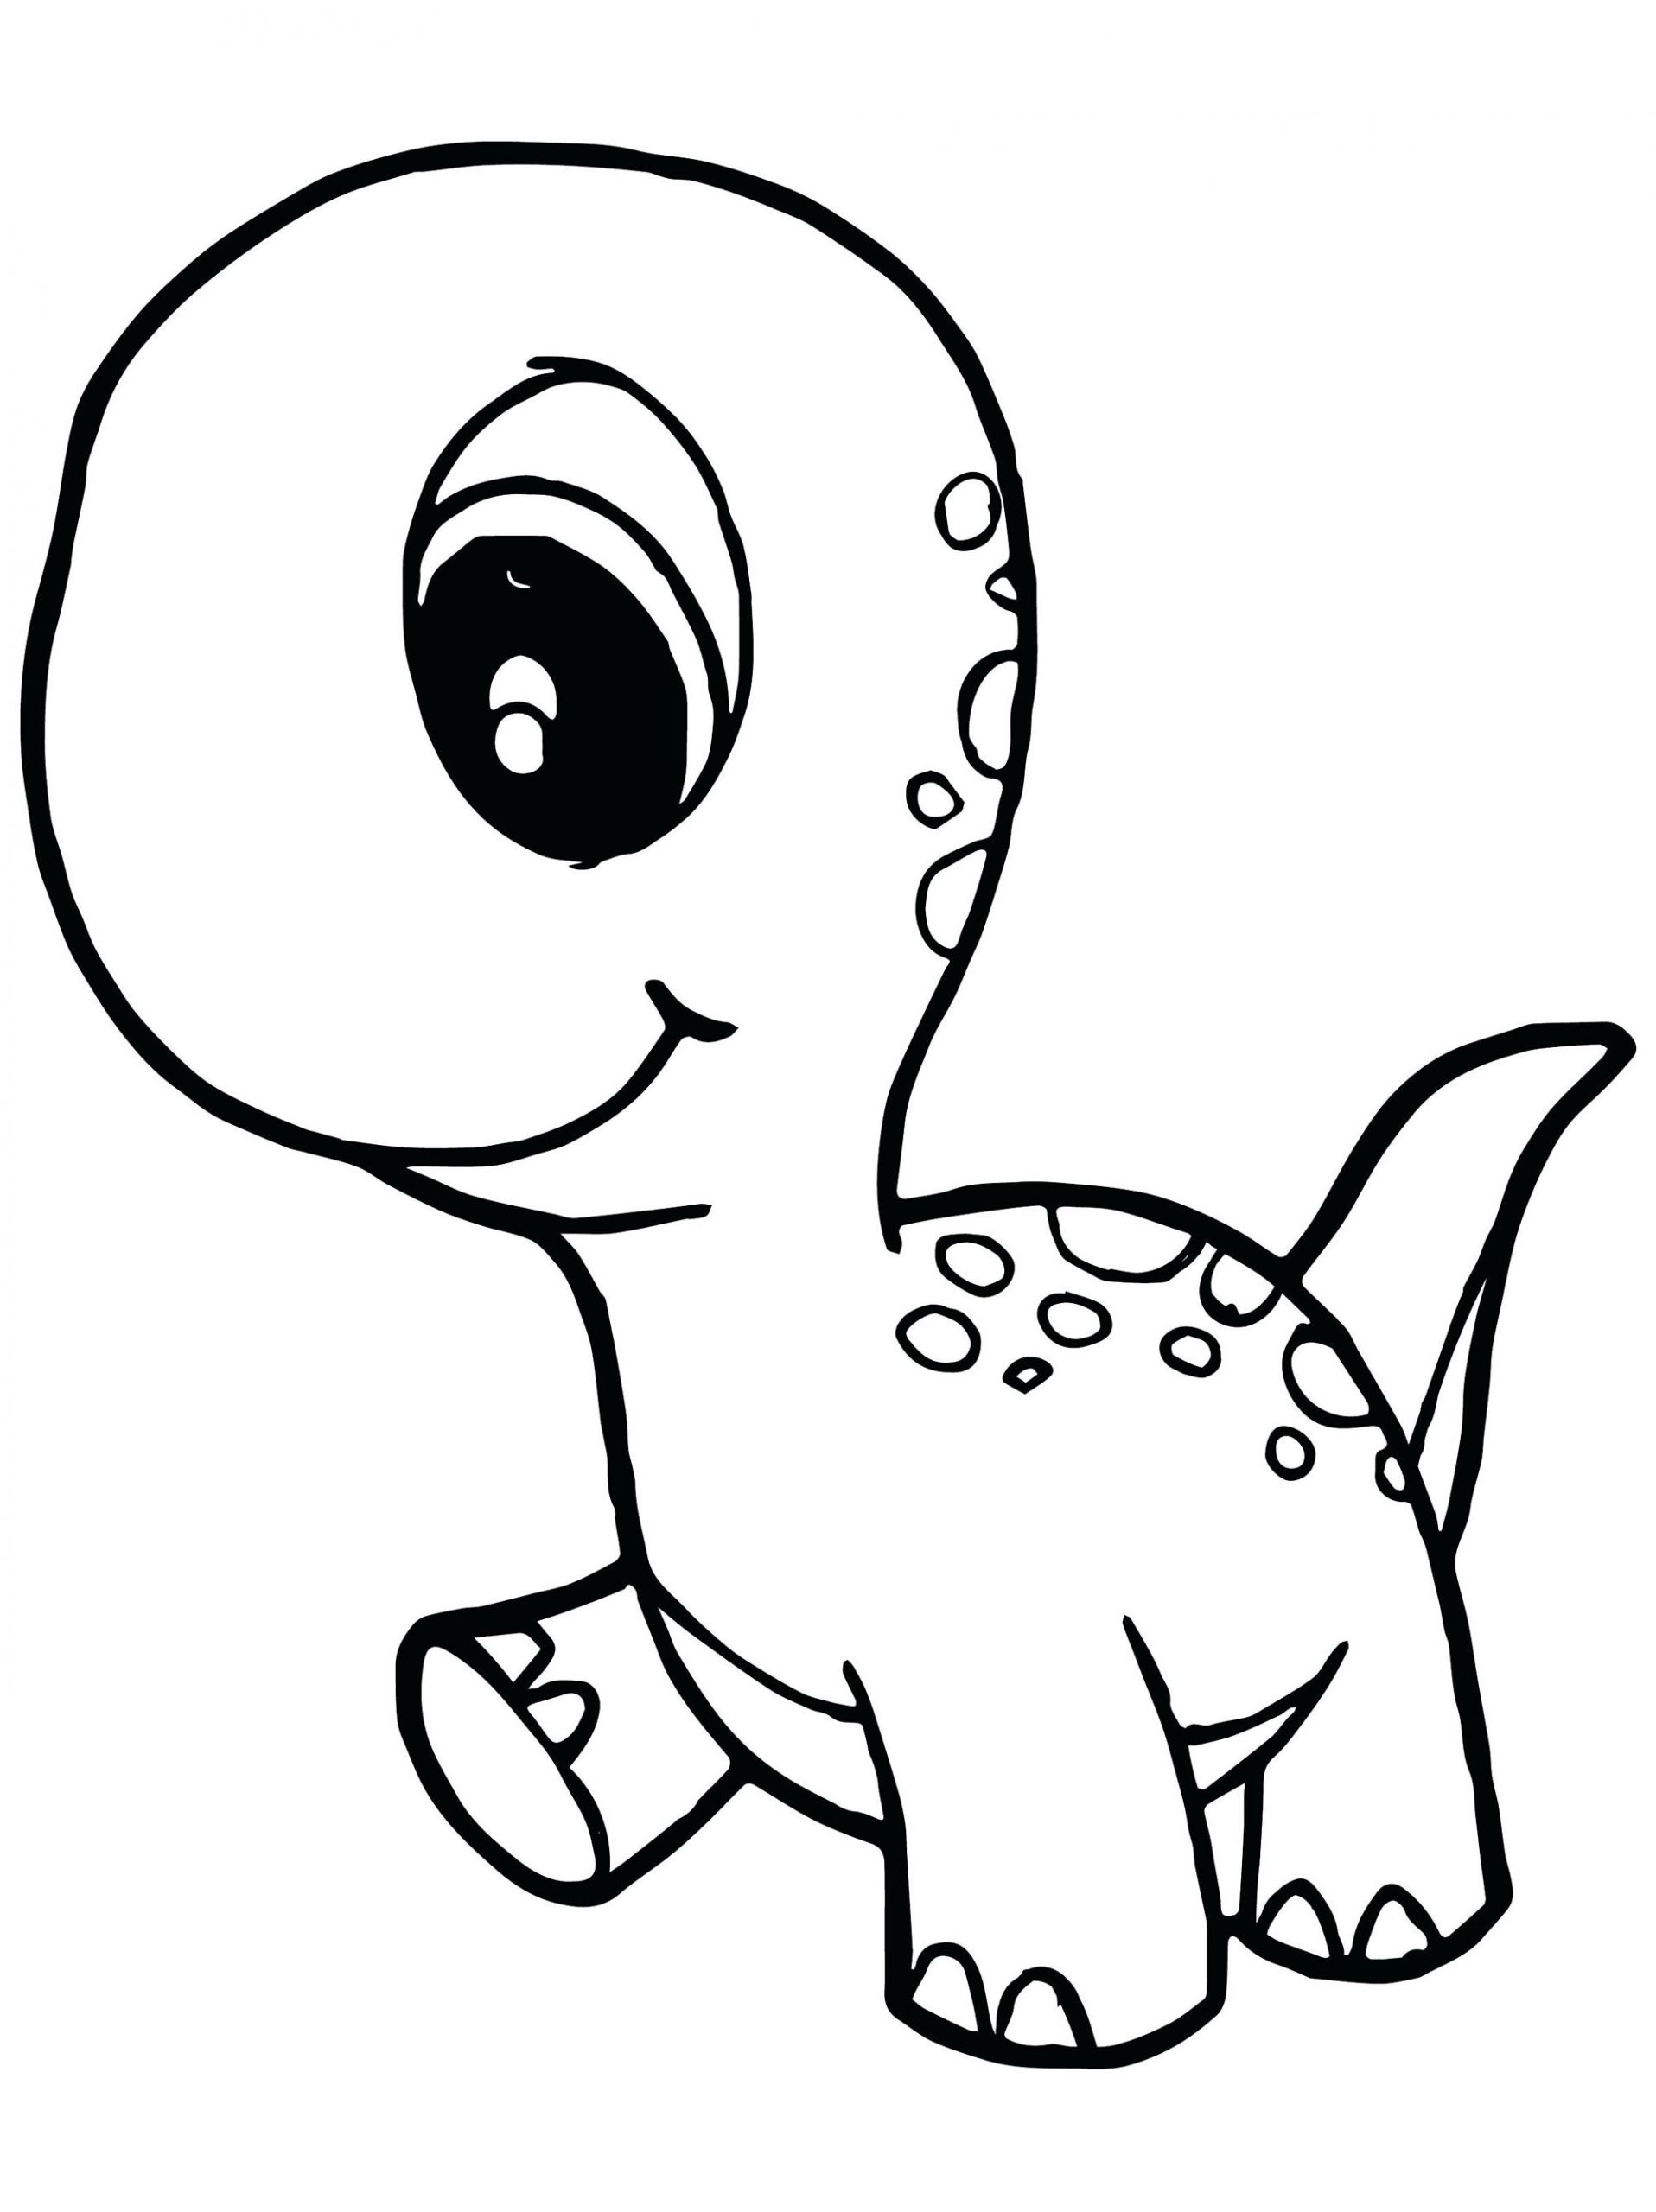 Coloring Pages For Kids Dinosaurs
 Dinosaurs to Dinosaurs Kids Coloring Pages